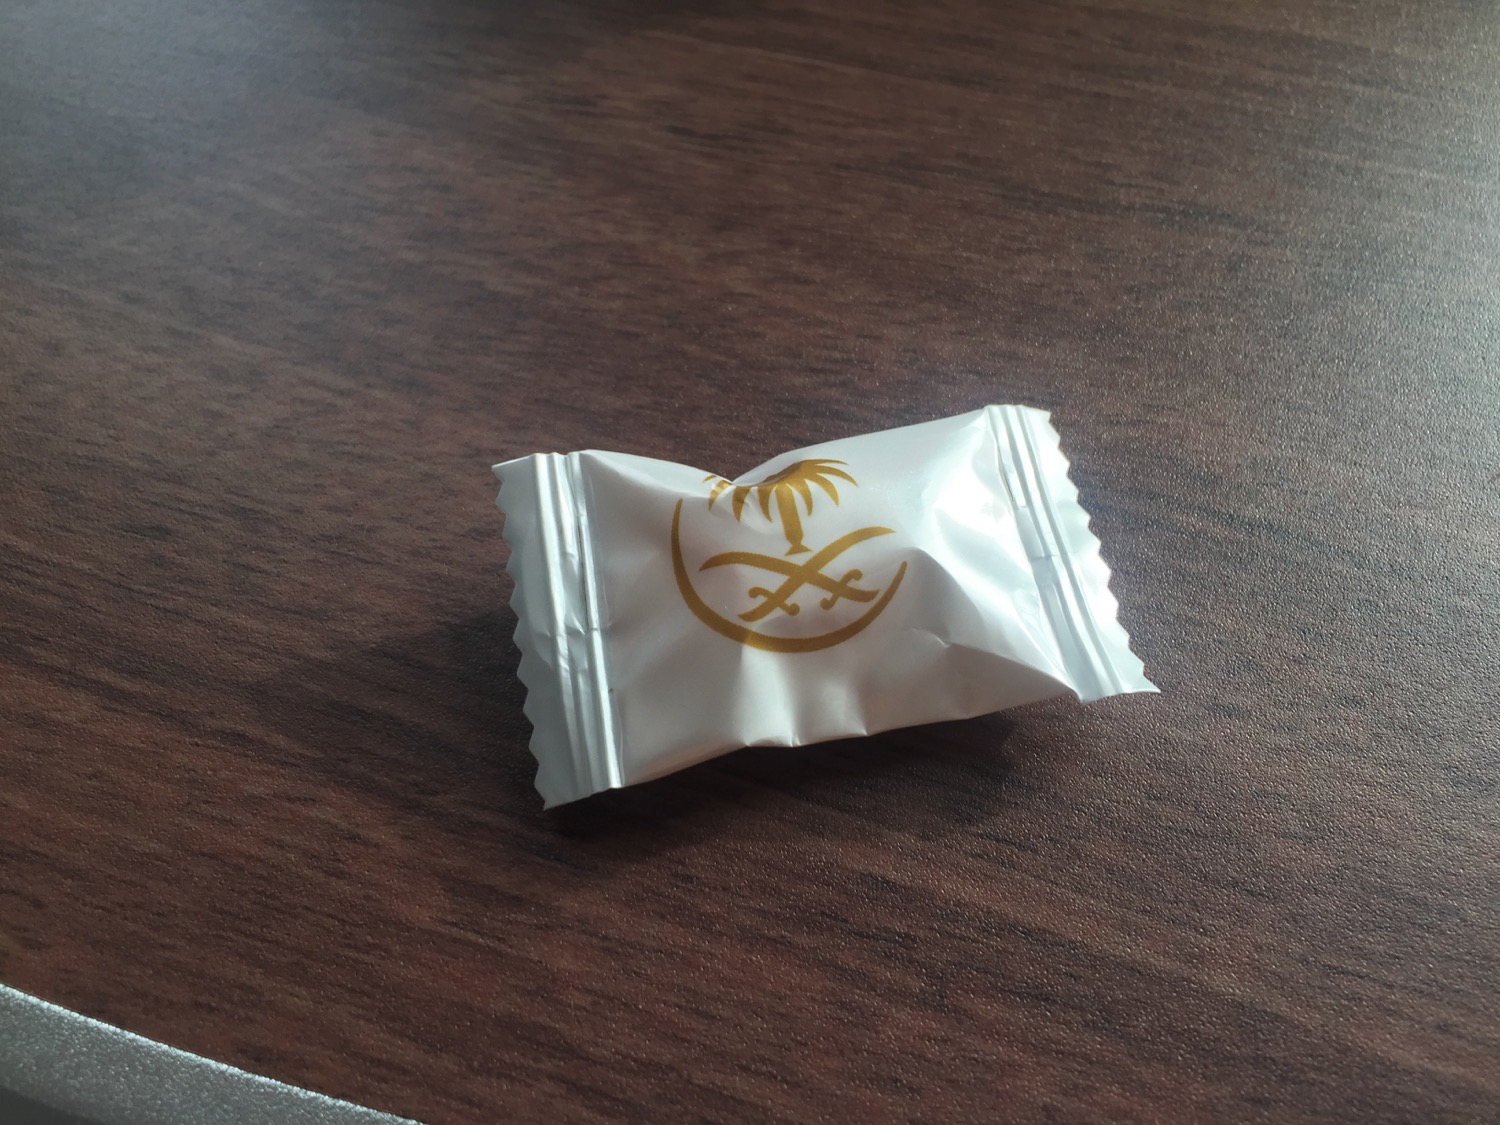 a small white package with gold logo on it